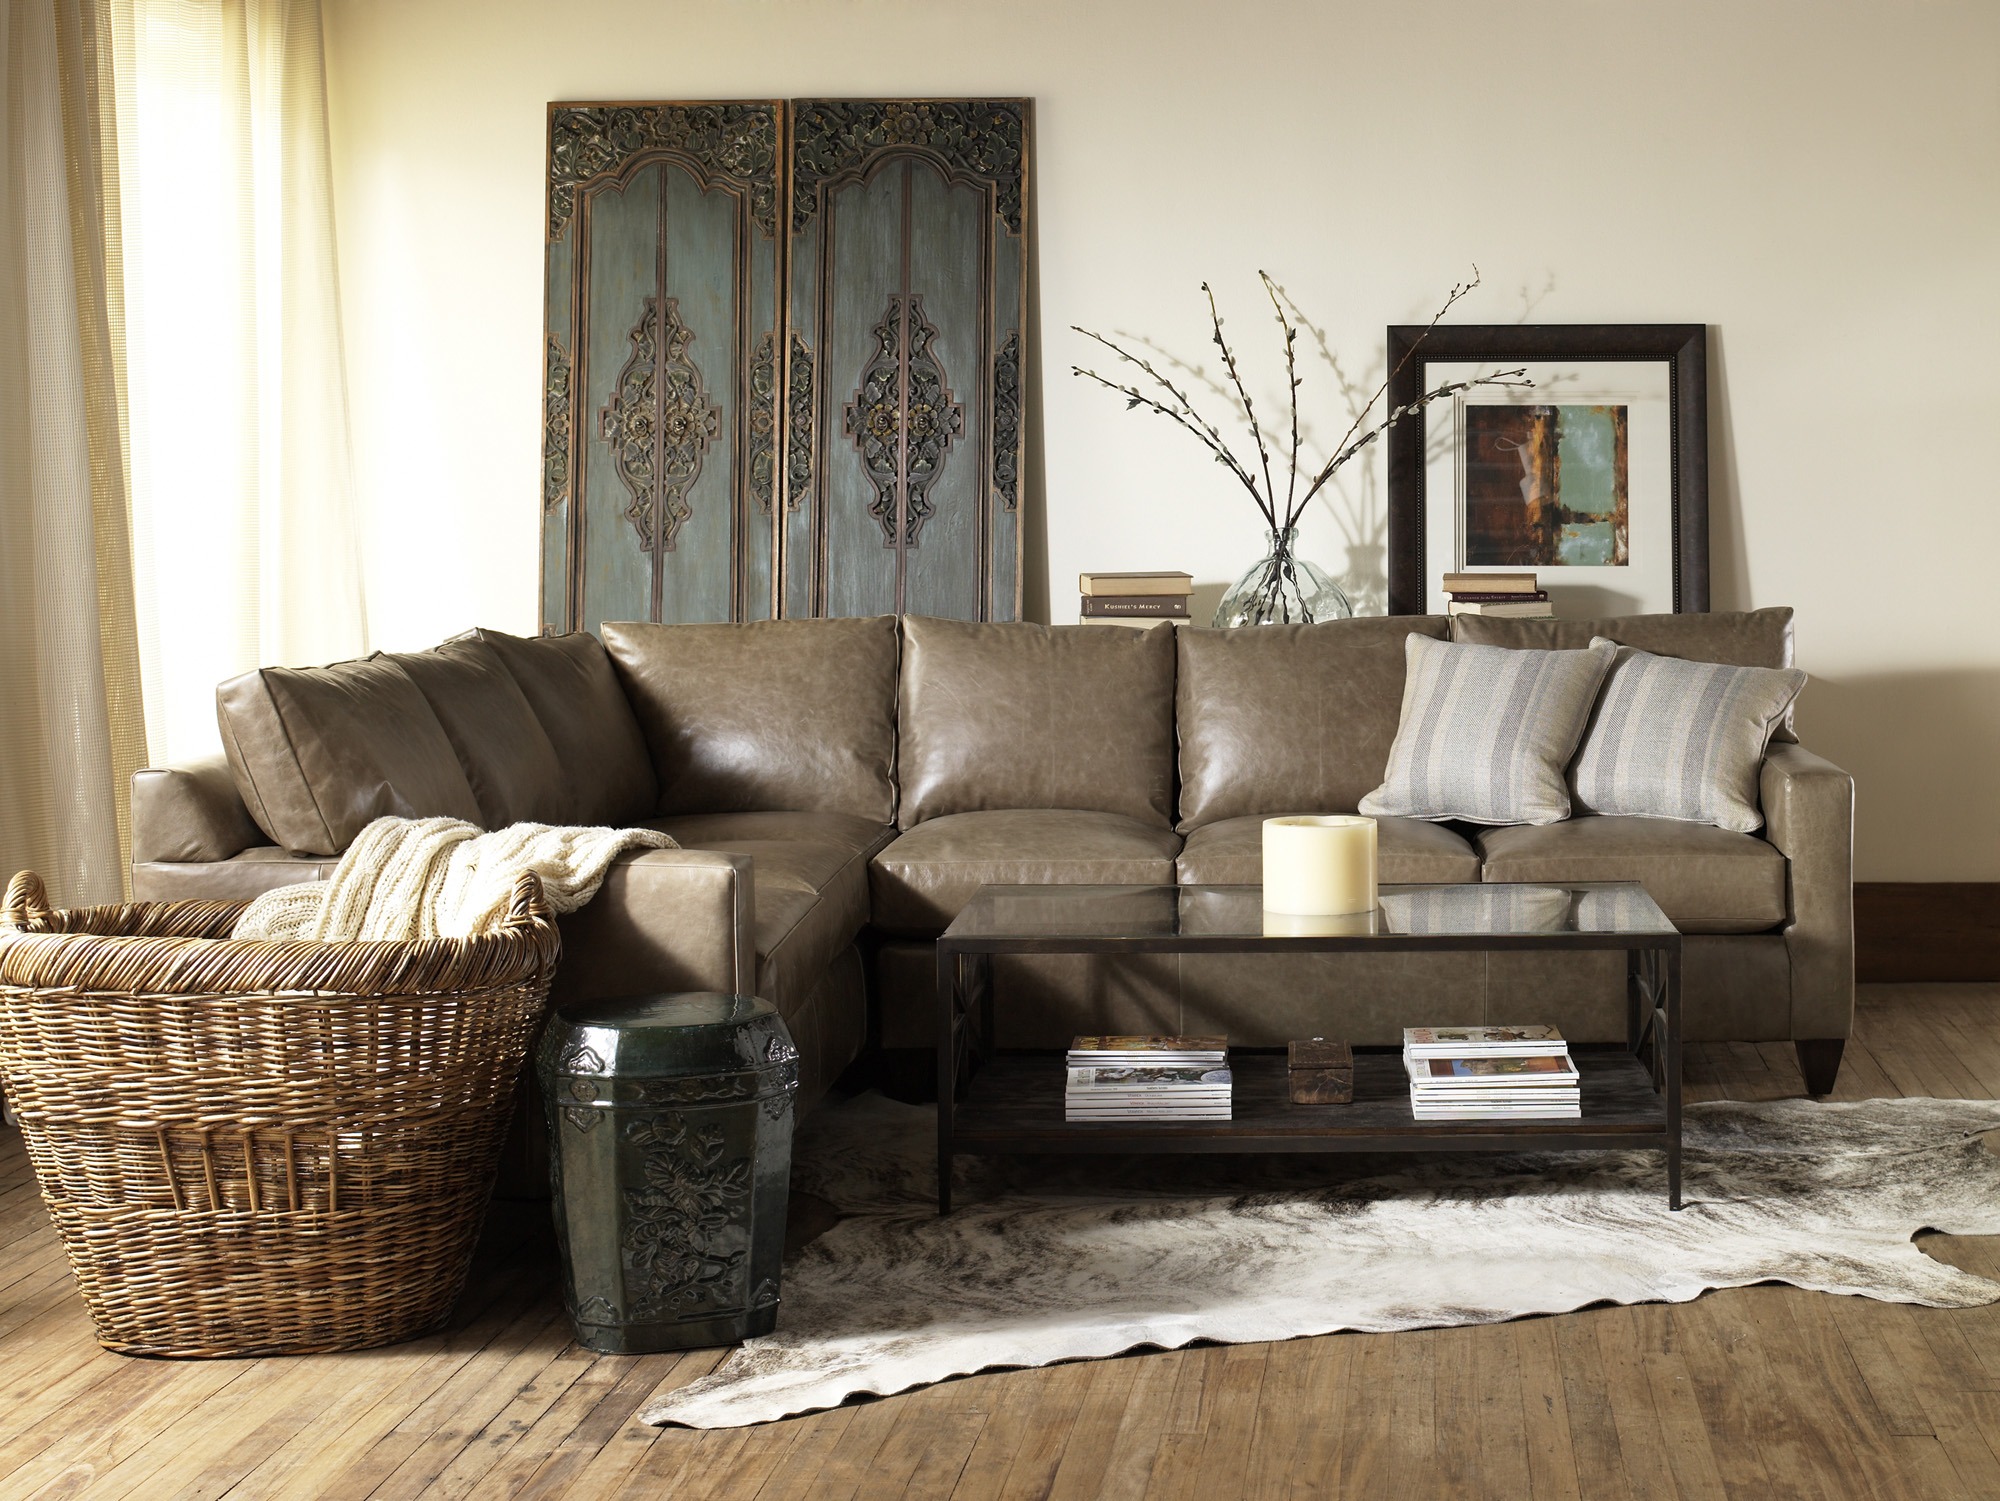 Leather Furniture and Decor - Cabot House Furniture and Design